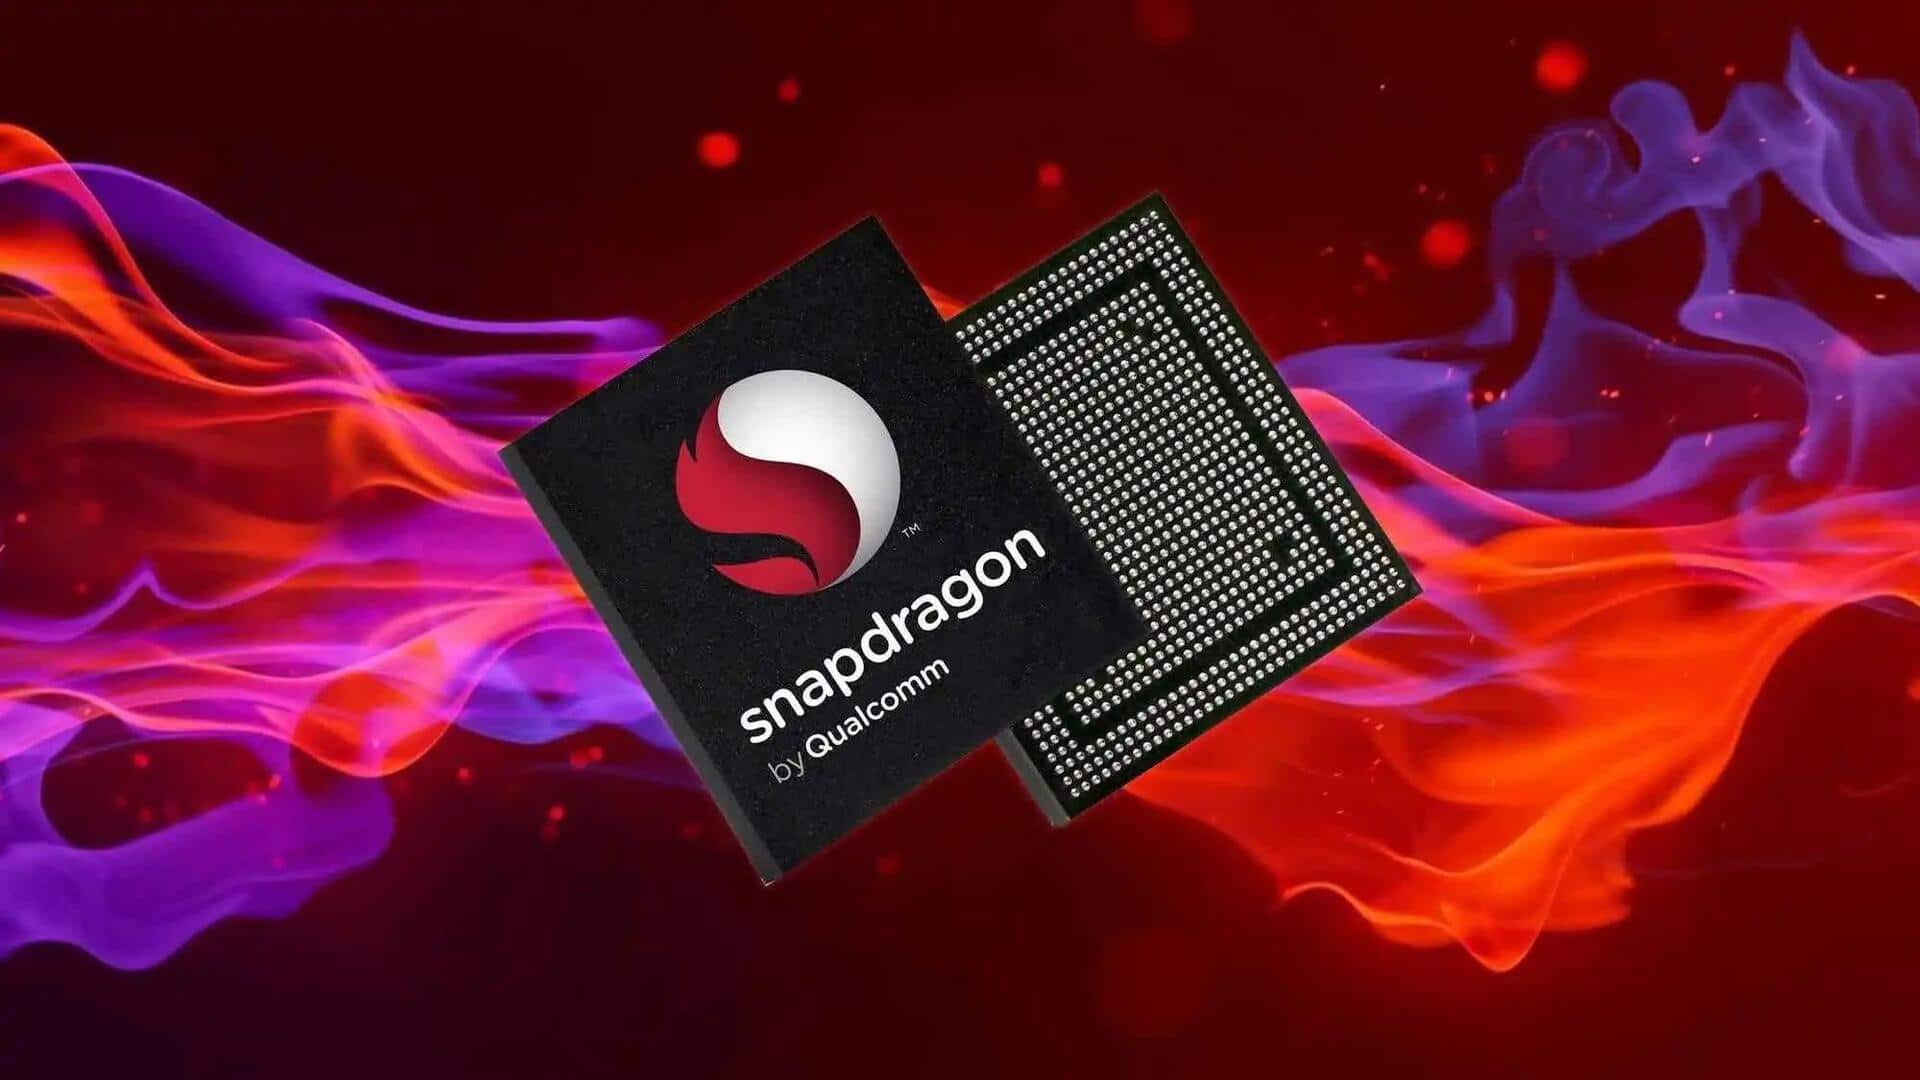 Qualcomm to unveil flagship Snapdragon chip on March 18